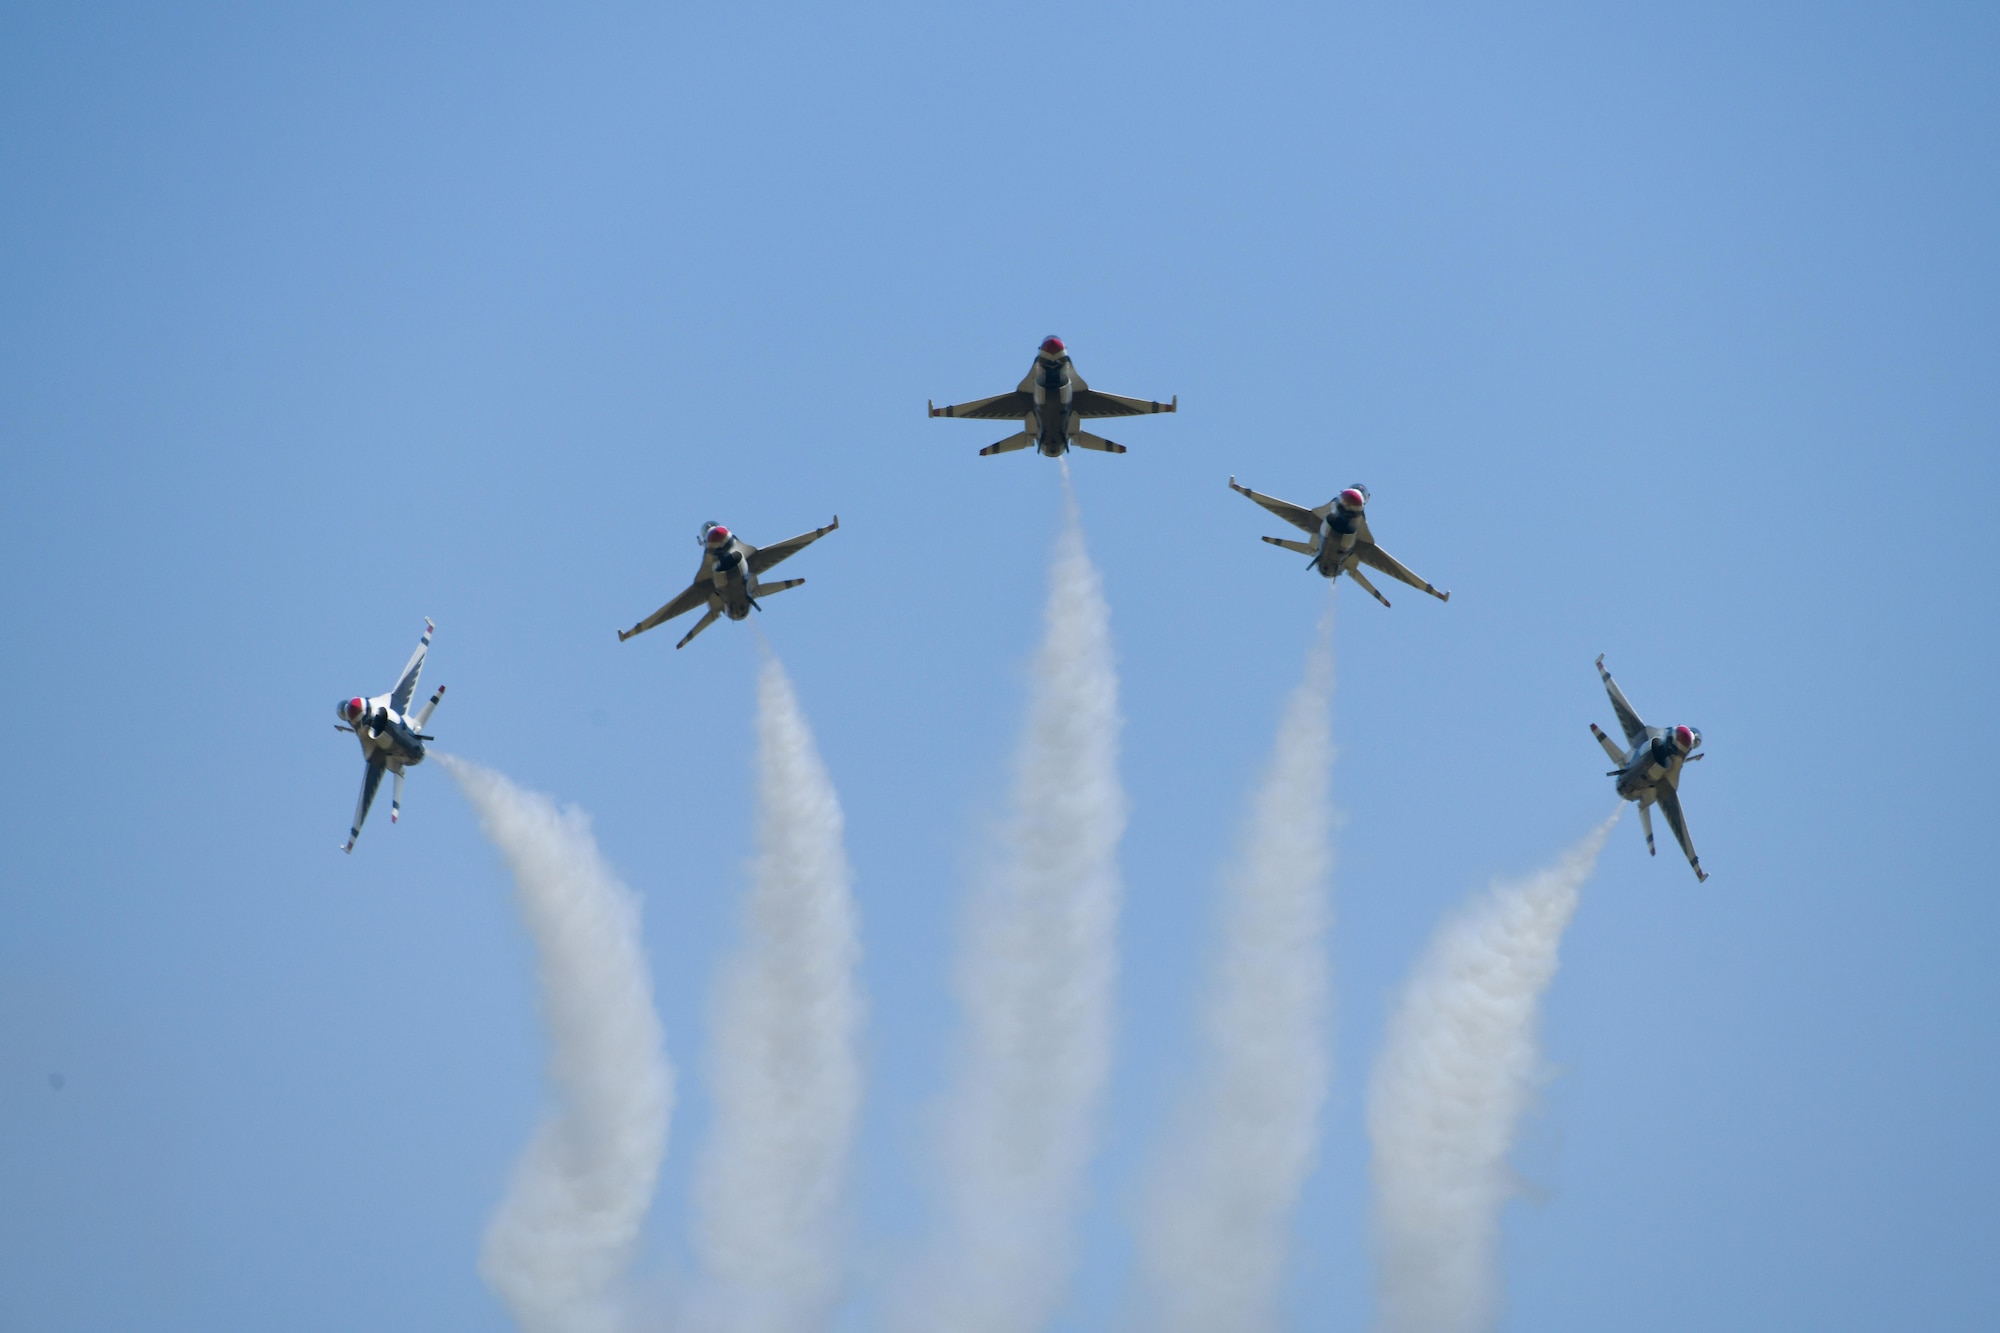 The Thunderbirds perform a bomb burst aerial demonstration over F.E. Warren Air Force Base July 26, 2021. Practice was held in anticipation of Wings Over Warren, July 28, 2021 Wings over Warren is an annual air show scheduled in conjunction with Cheyenne Frontier Days. . (U.S. Air Force photo by Airman 1st Class Charles Munoz)